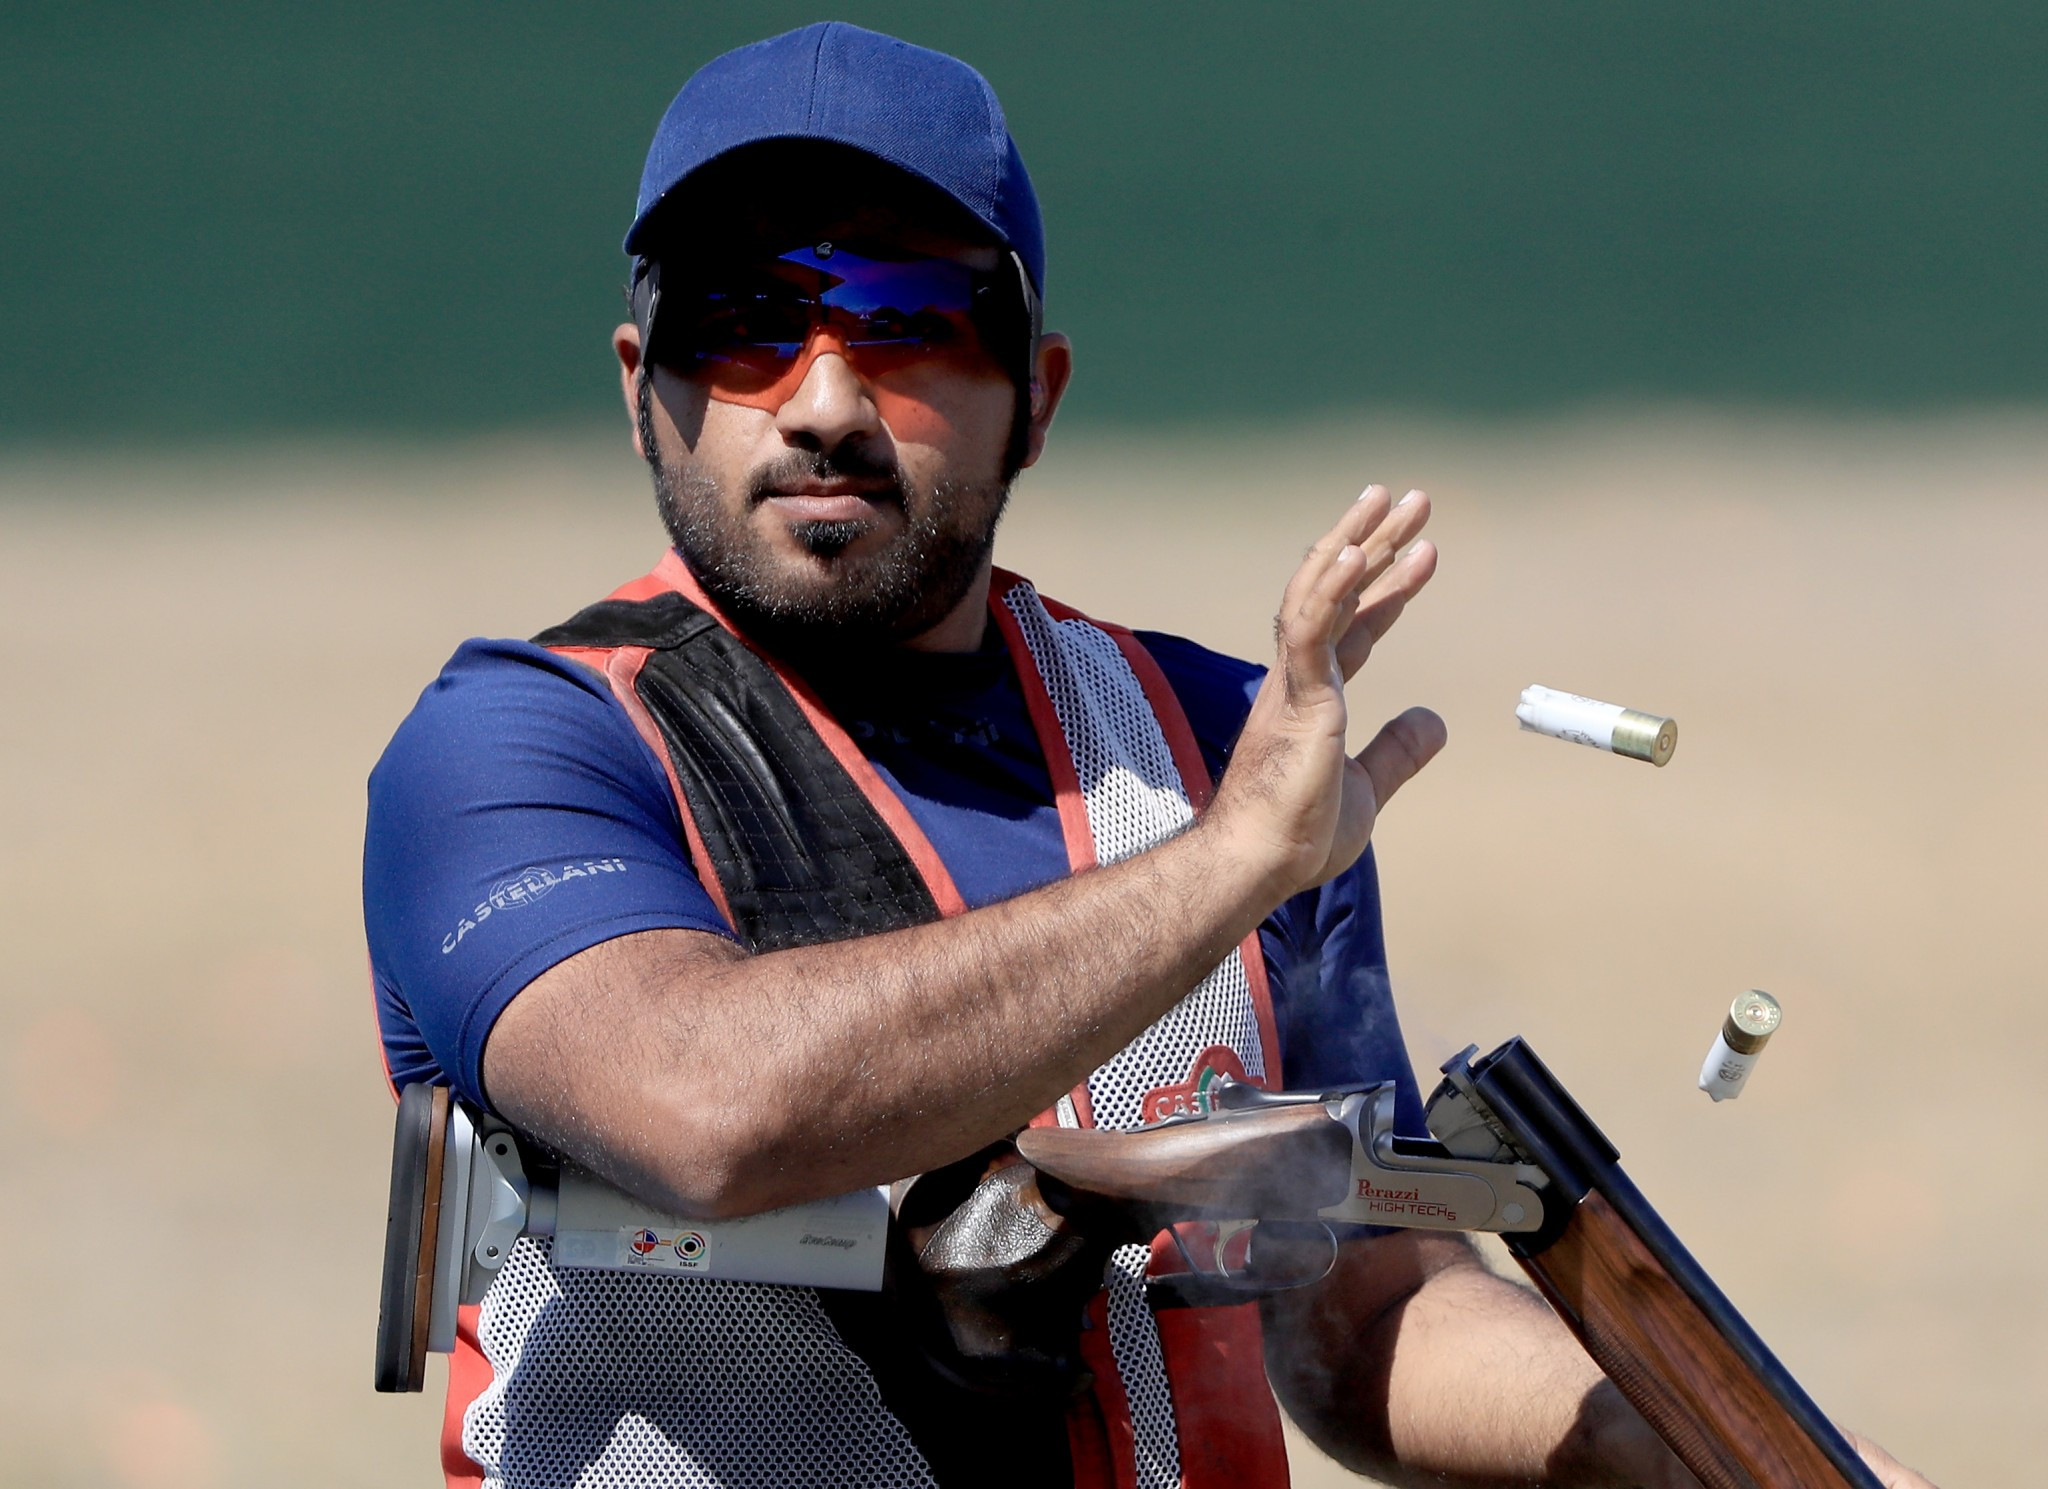 Khaled Alkaabi finished second in the men's double trap individual event ©Getty Images